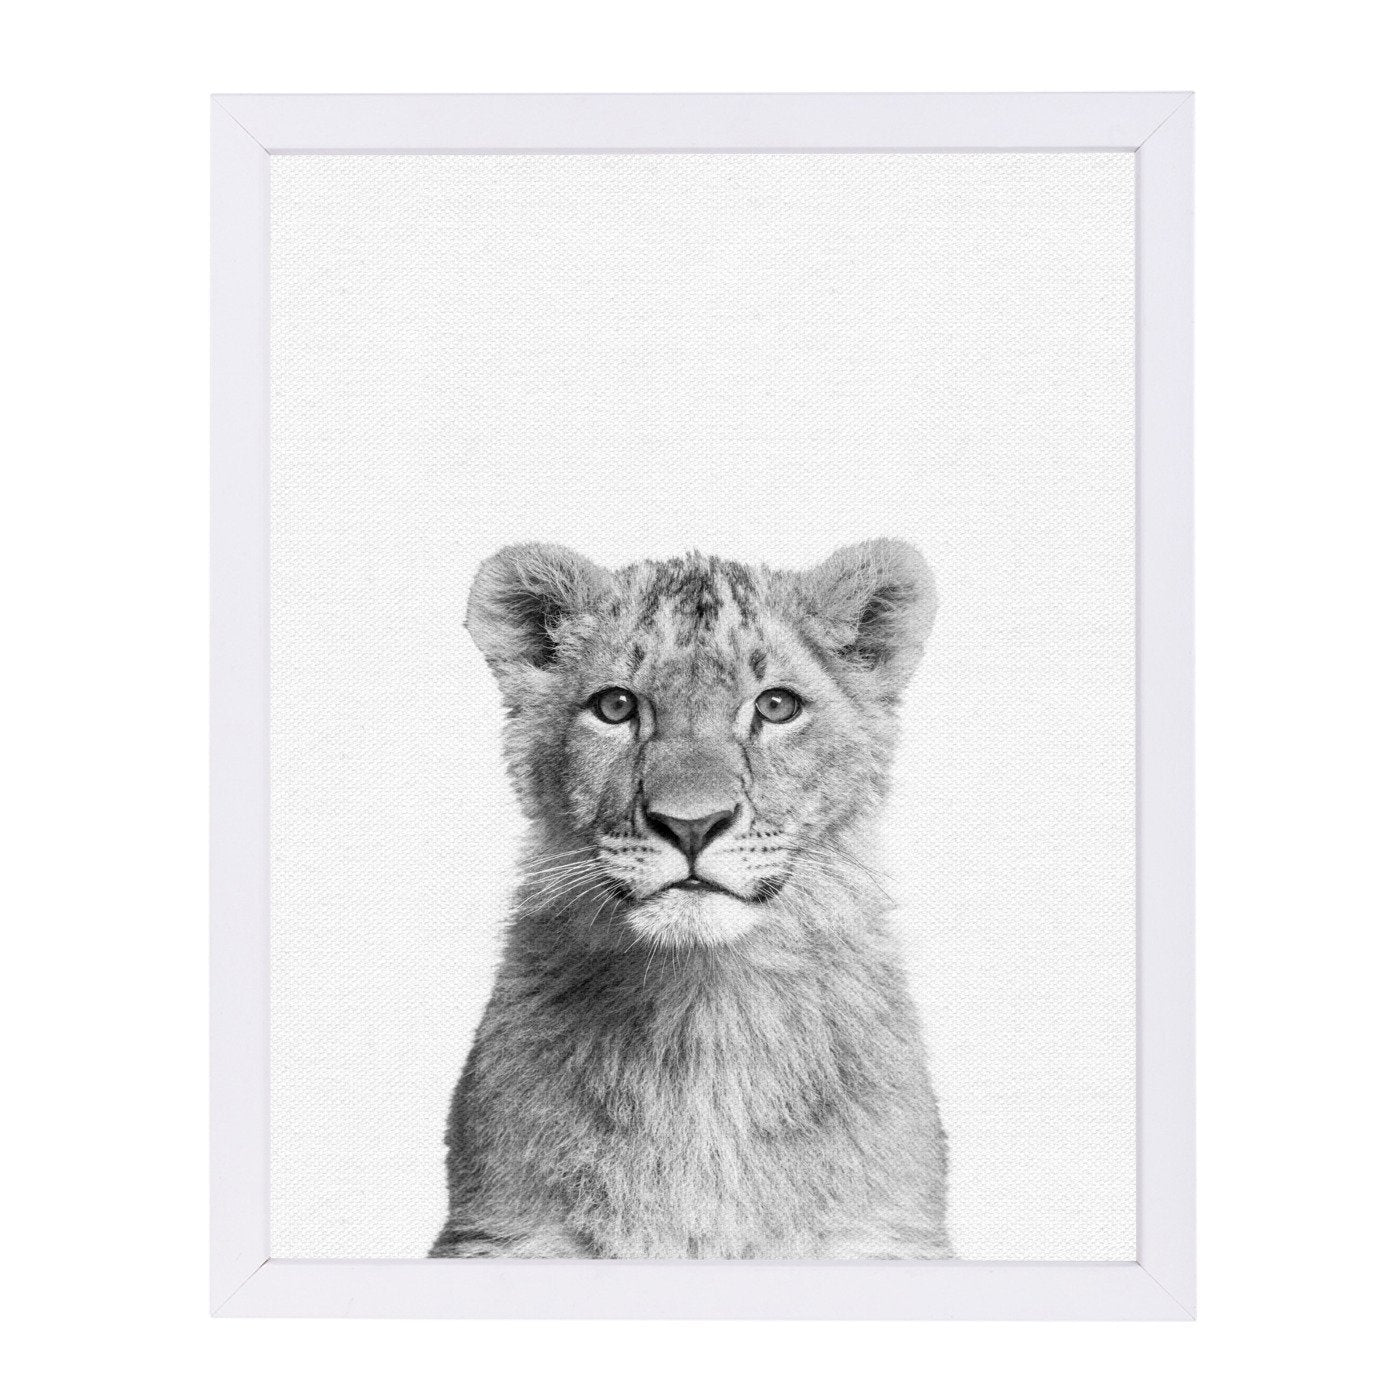 Baby Lion By Nuada - Framed Print - Americanflat